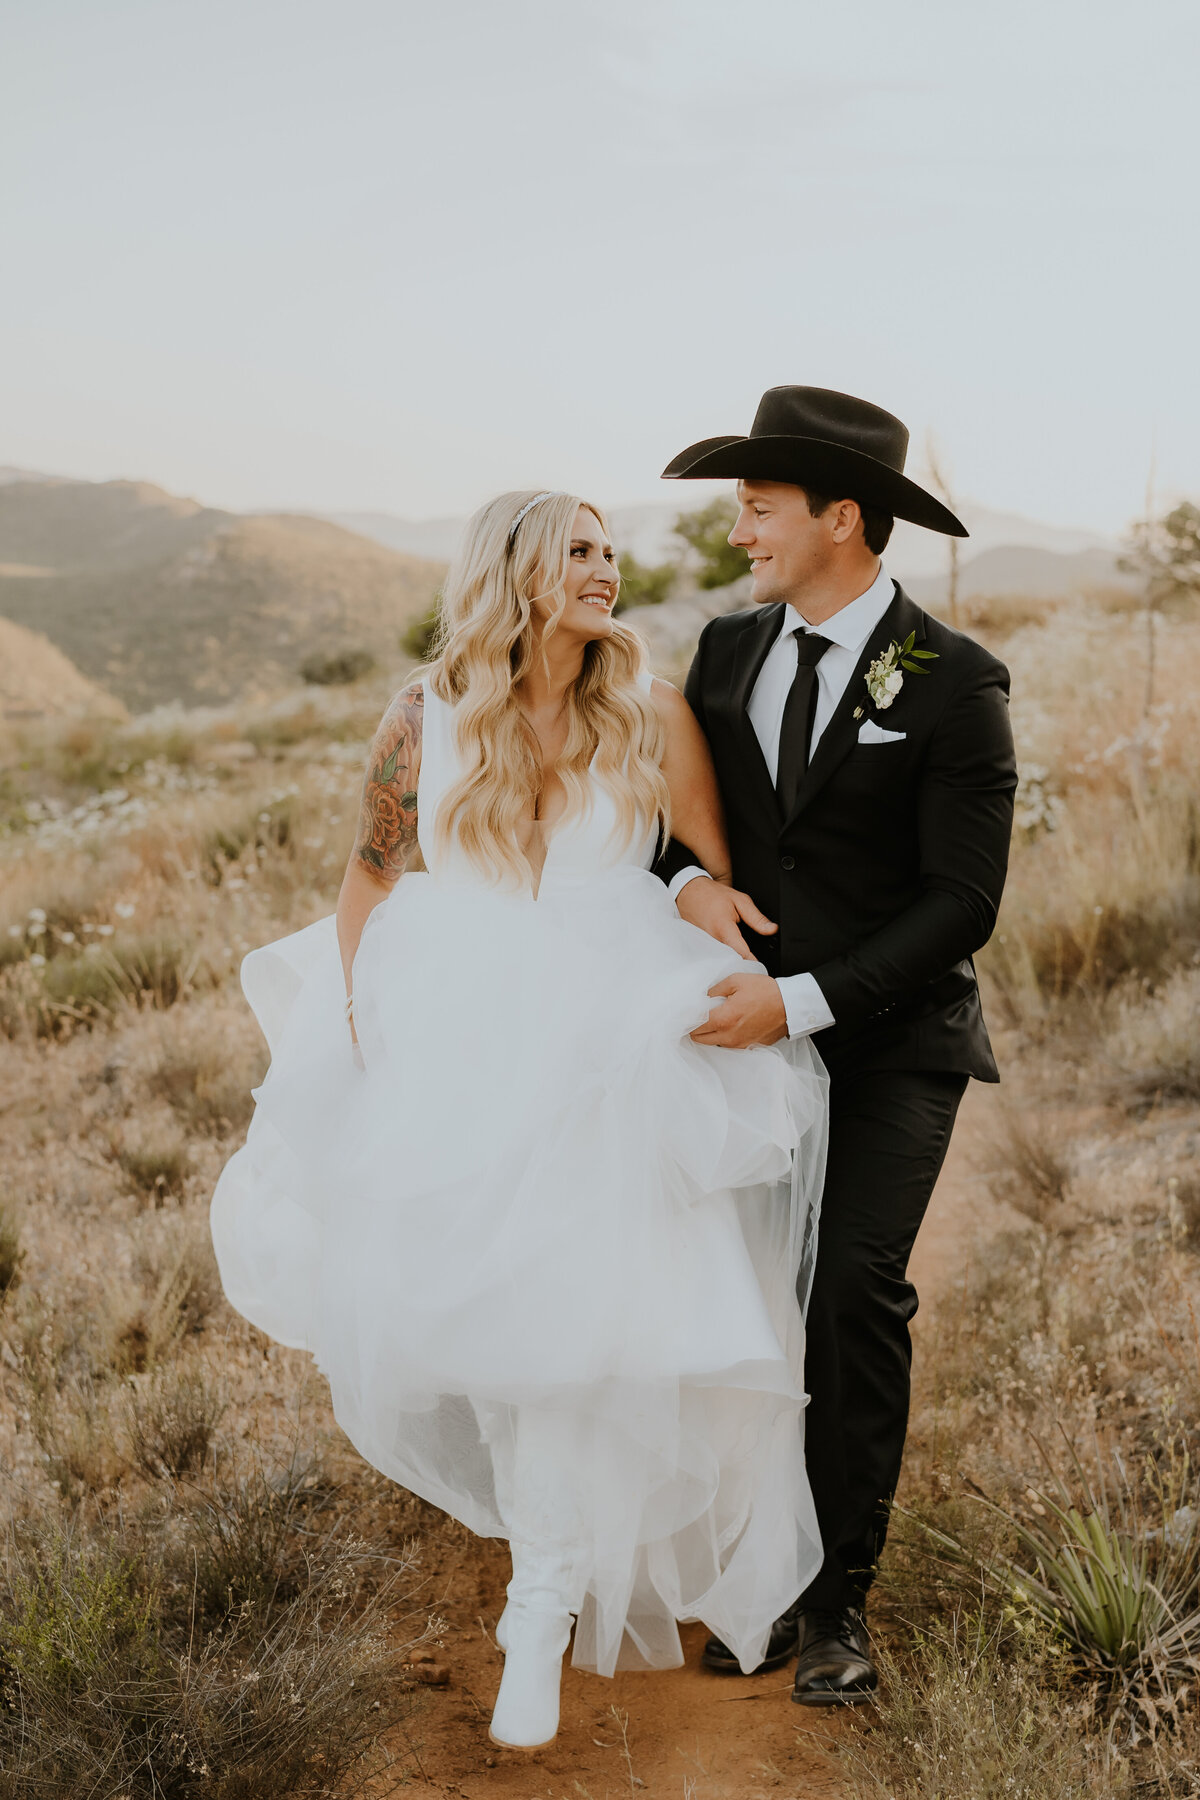 Bride and groom with cowboy hat